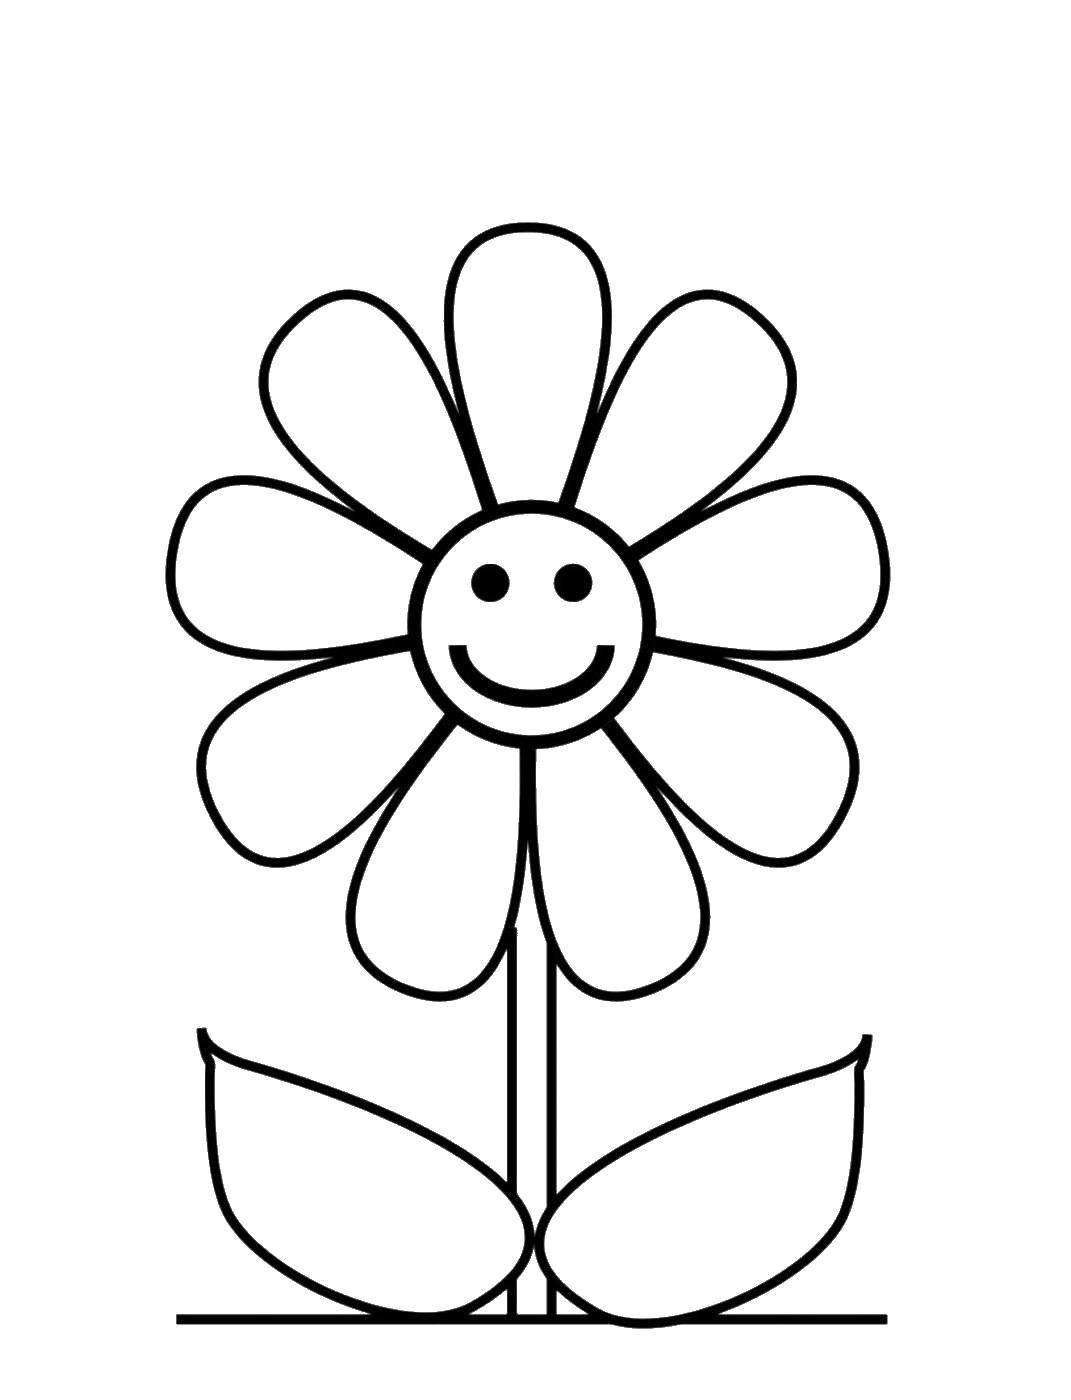 Coloring Joyful flower. Category Coloring pages for kids. Tags:  Flowers.